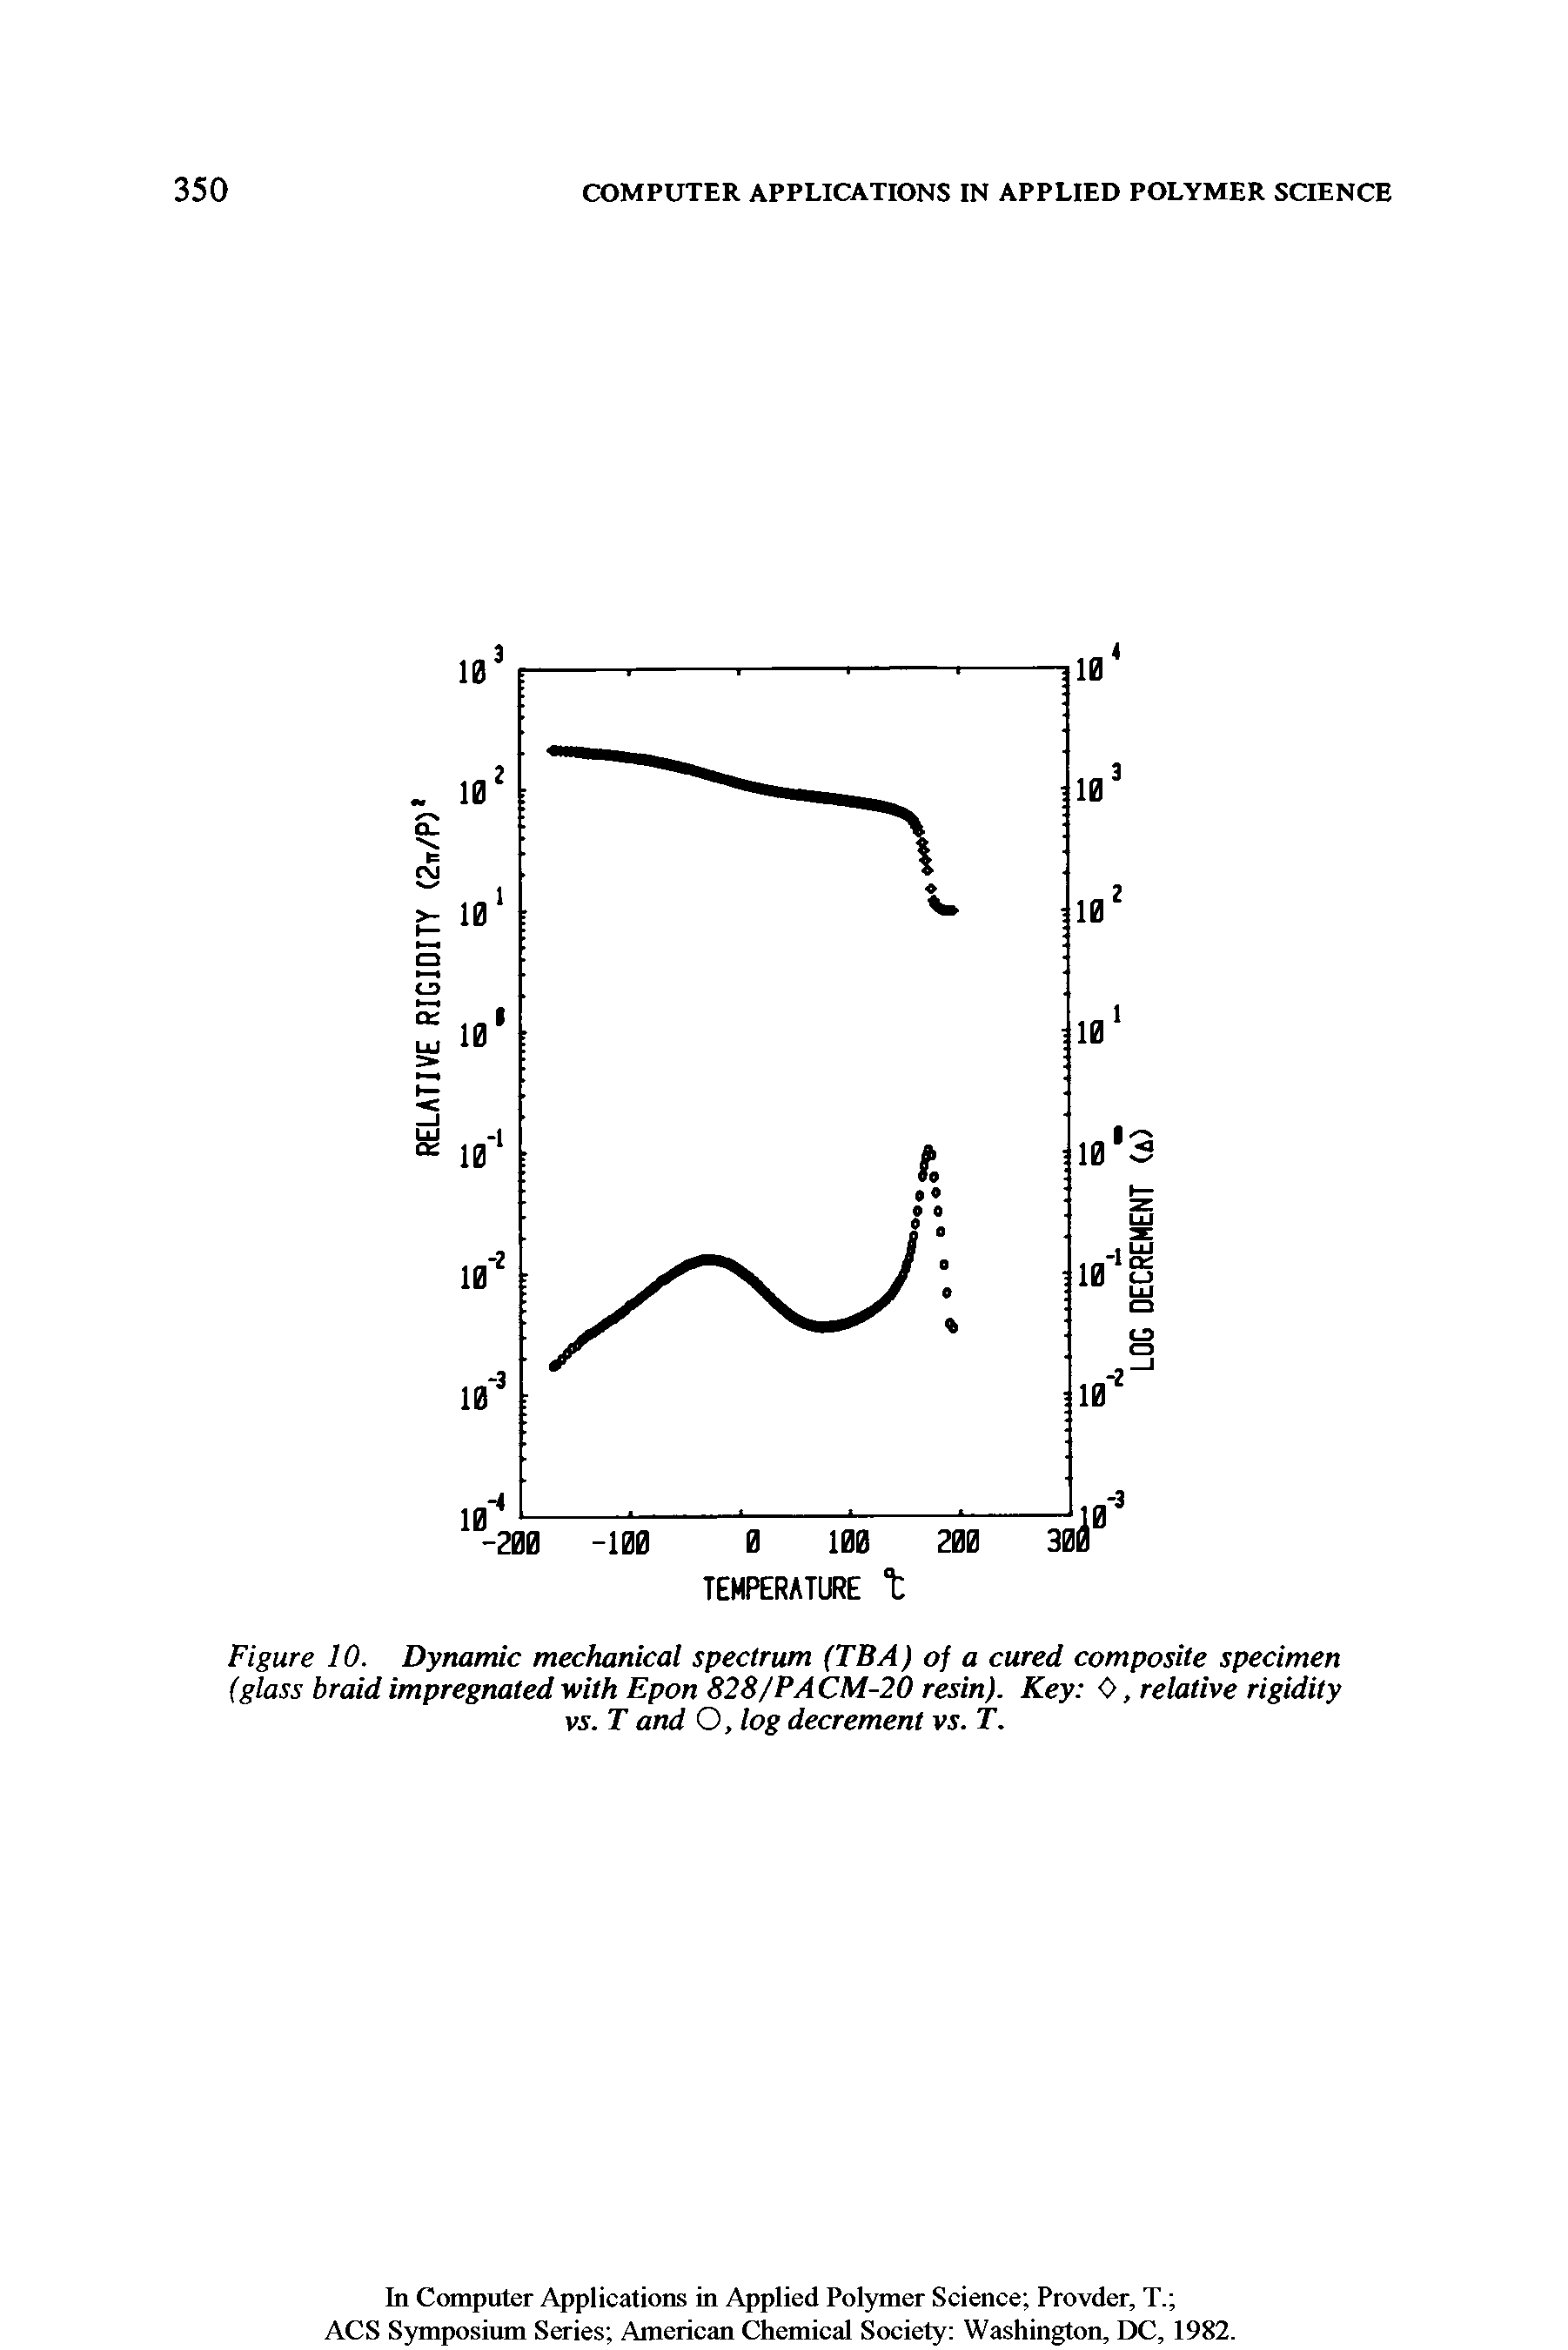 Figure 10. Dynamic mechanical spectrum (TBA) of a cured composite specimen (glass braid impregnated with Epon 828/PACM-20 resin). Key 0, relative rigidity vs. T and O, log decrement vs. T.